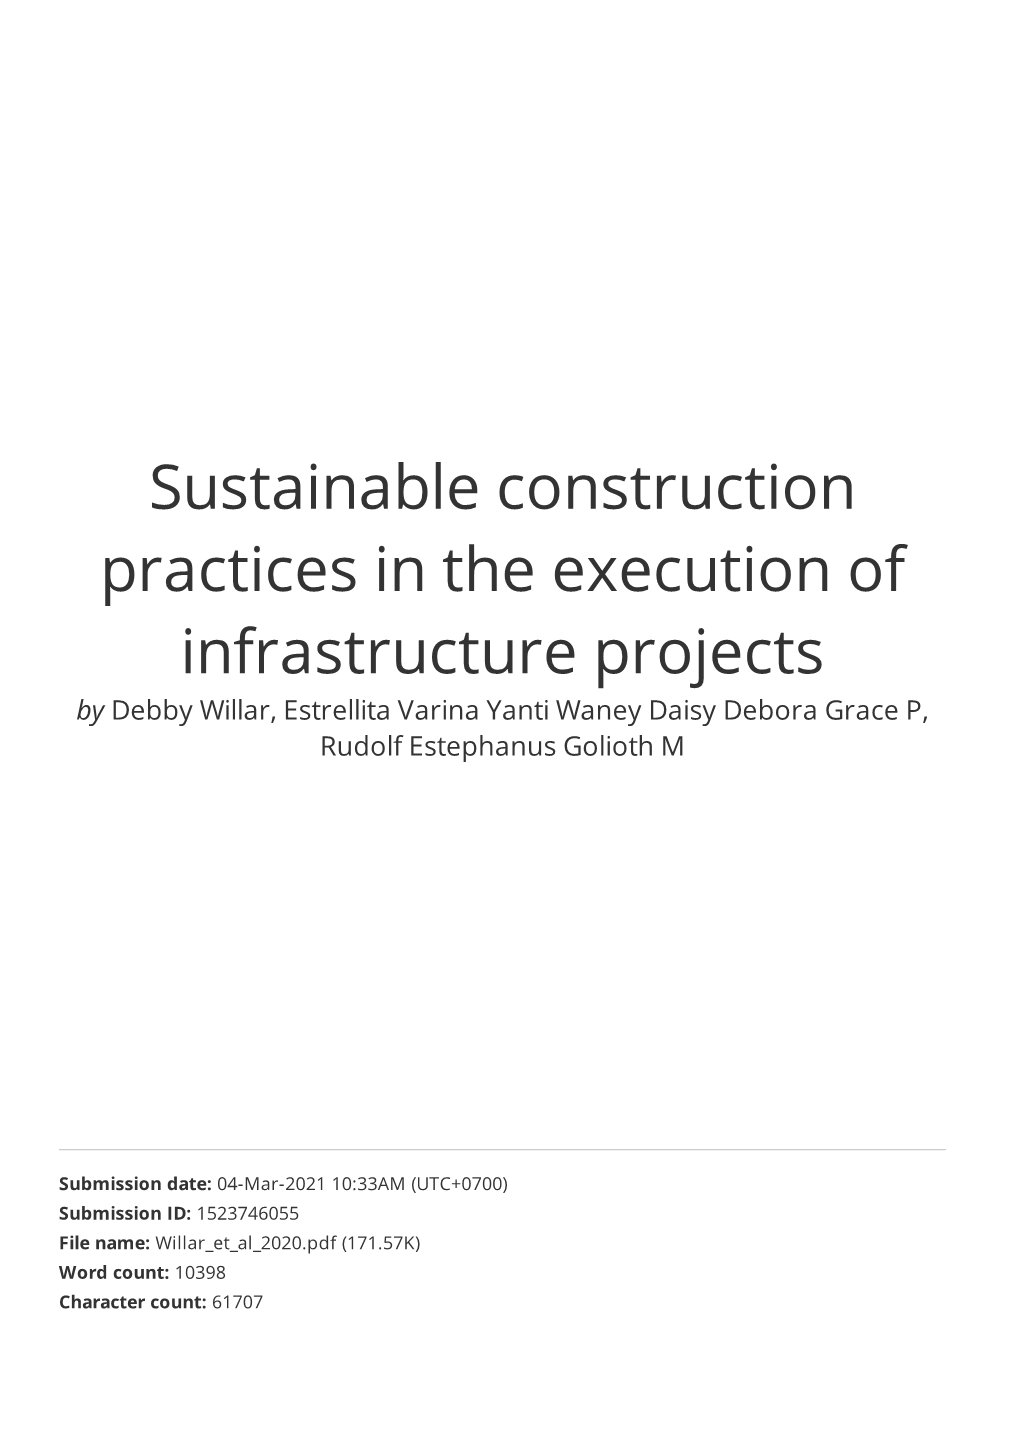 Sustainable Construction Practices in the Execution of Infrastructure Projects